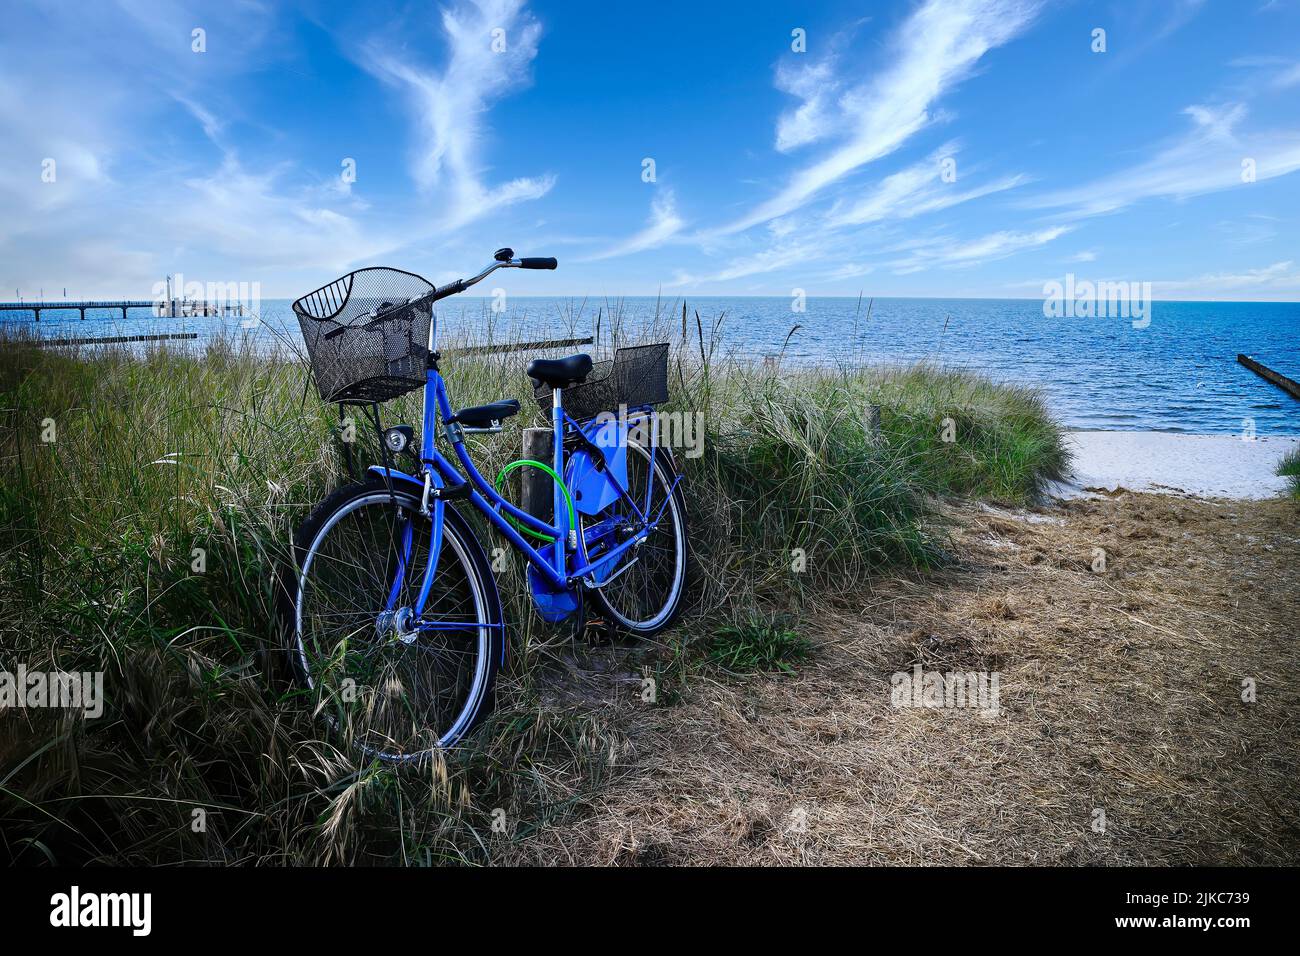 Blue bicycle on a sand dune with the beach and sea in the background Stock Photo